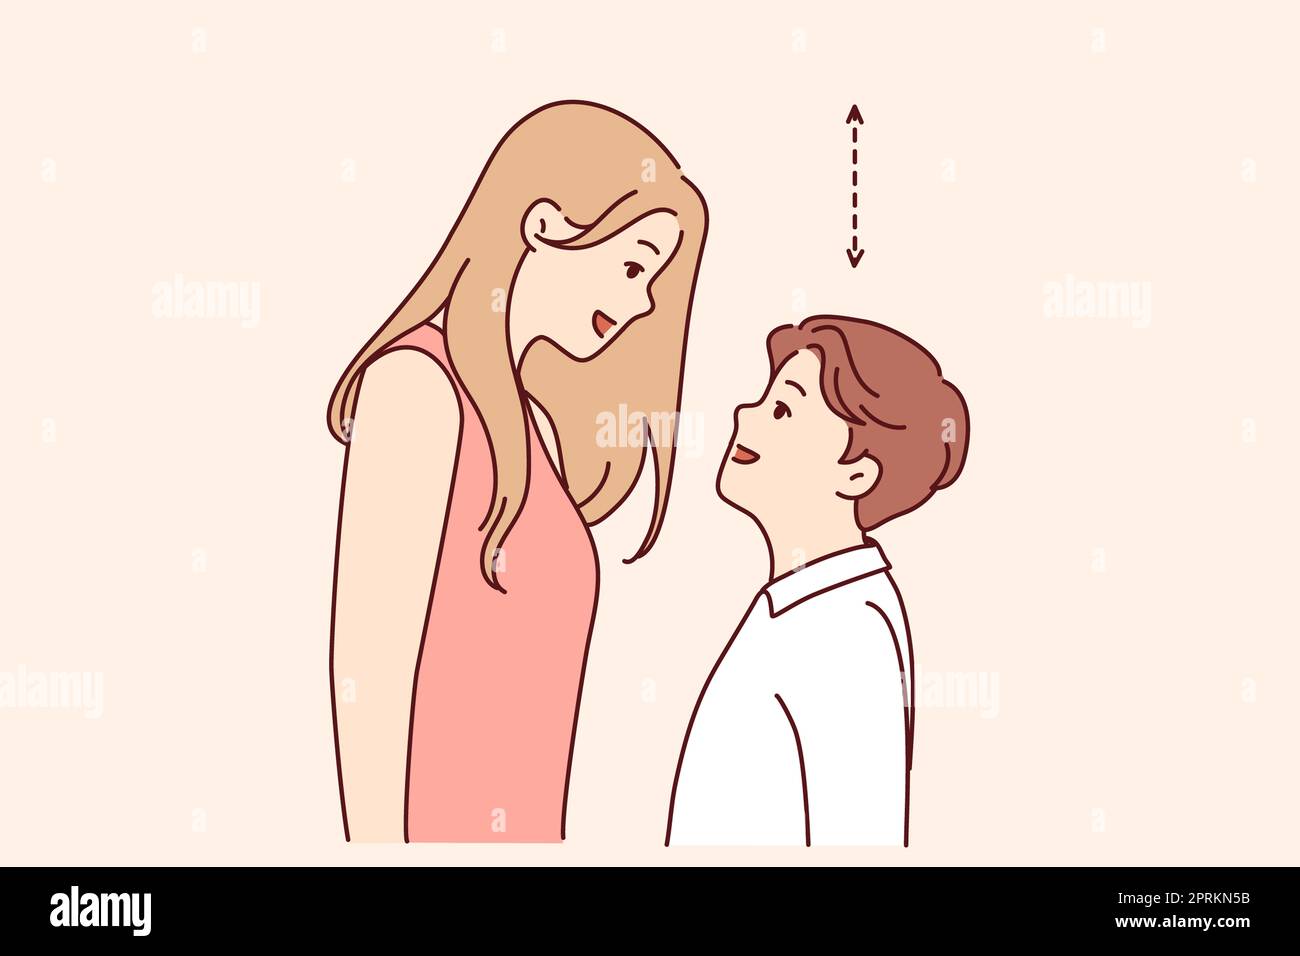 https://c8.alamy.com/comp/2PRKN5B/couple-with-different-height-look-in-eyes-tall-woman-and-short-man-contrasting-height-relationship-problem-concept-vector-illustration-2PRKN5B.jpg